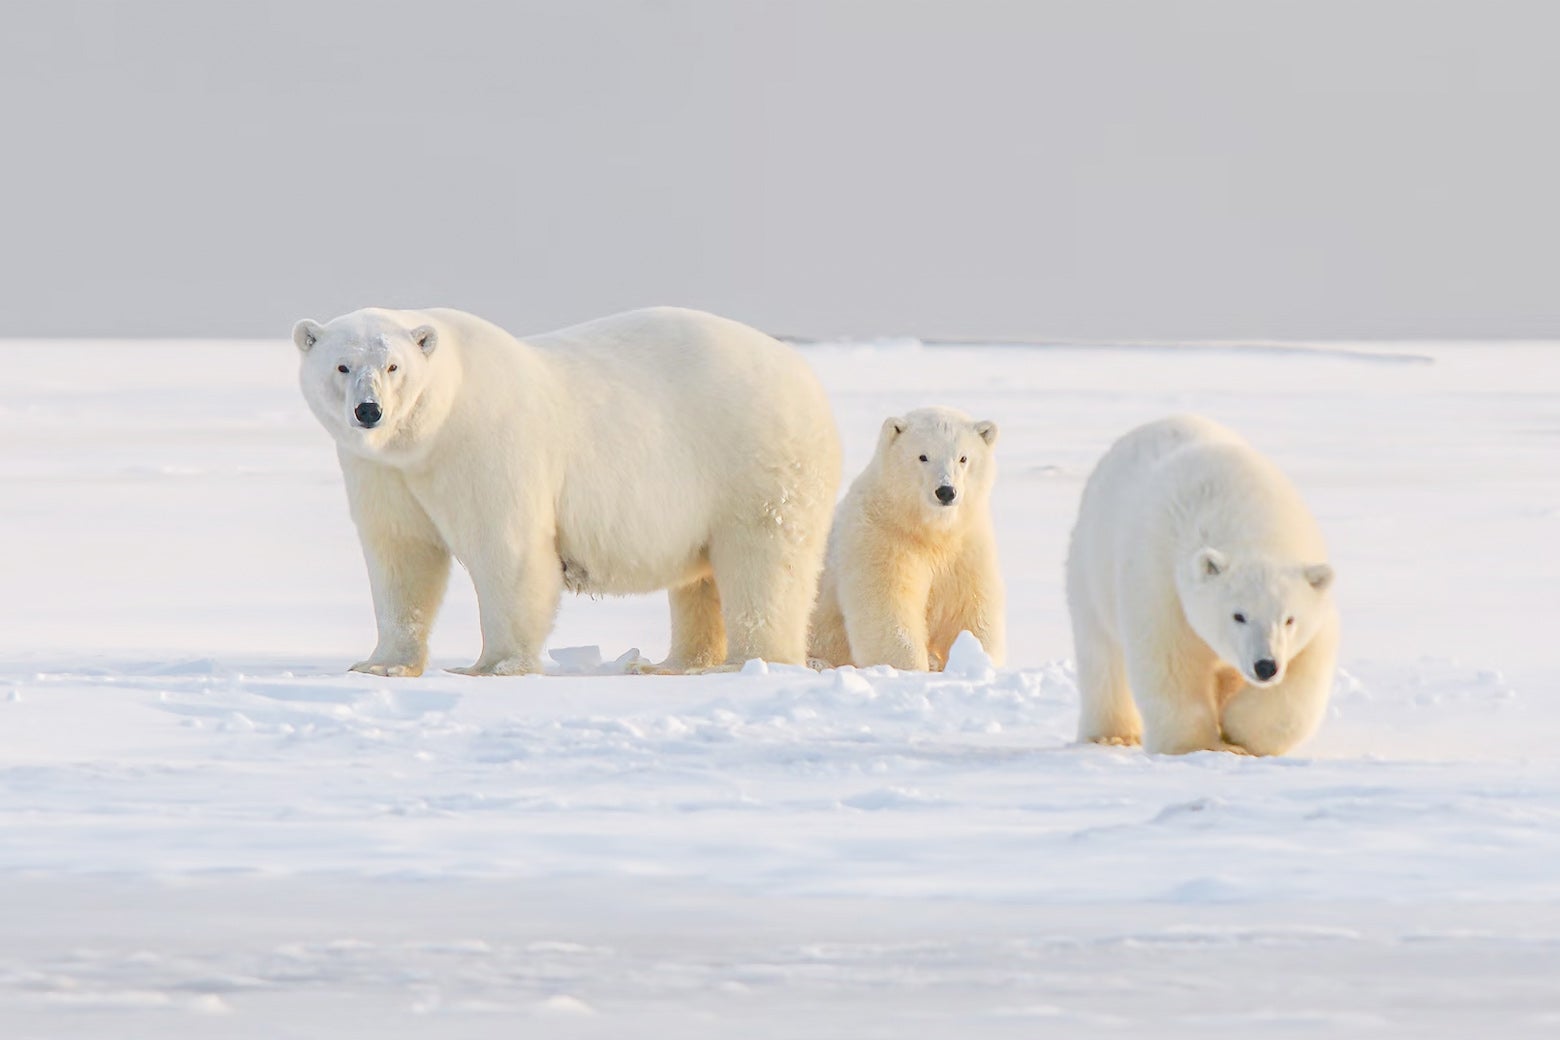 Three polar bears stand together in the arctic snow.